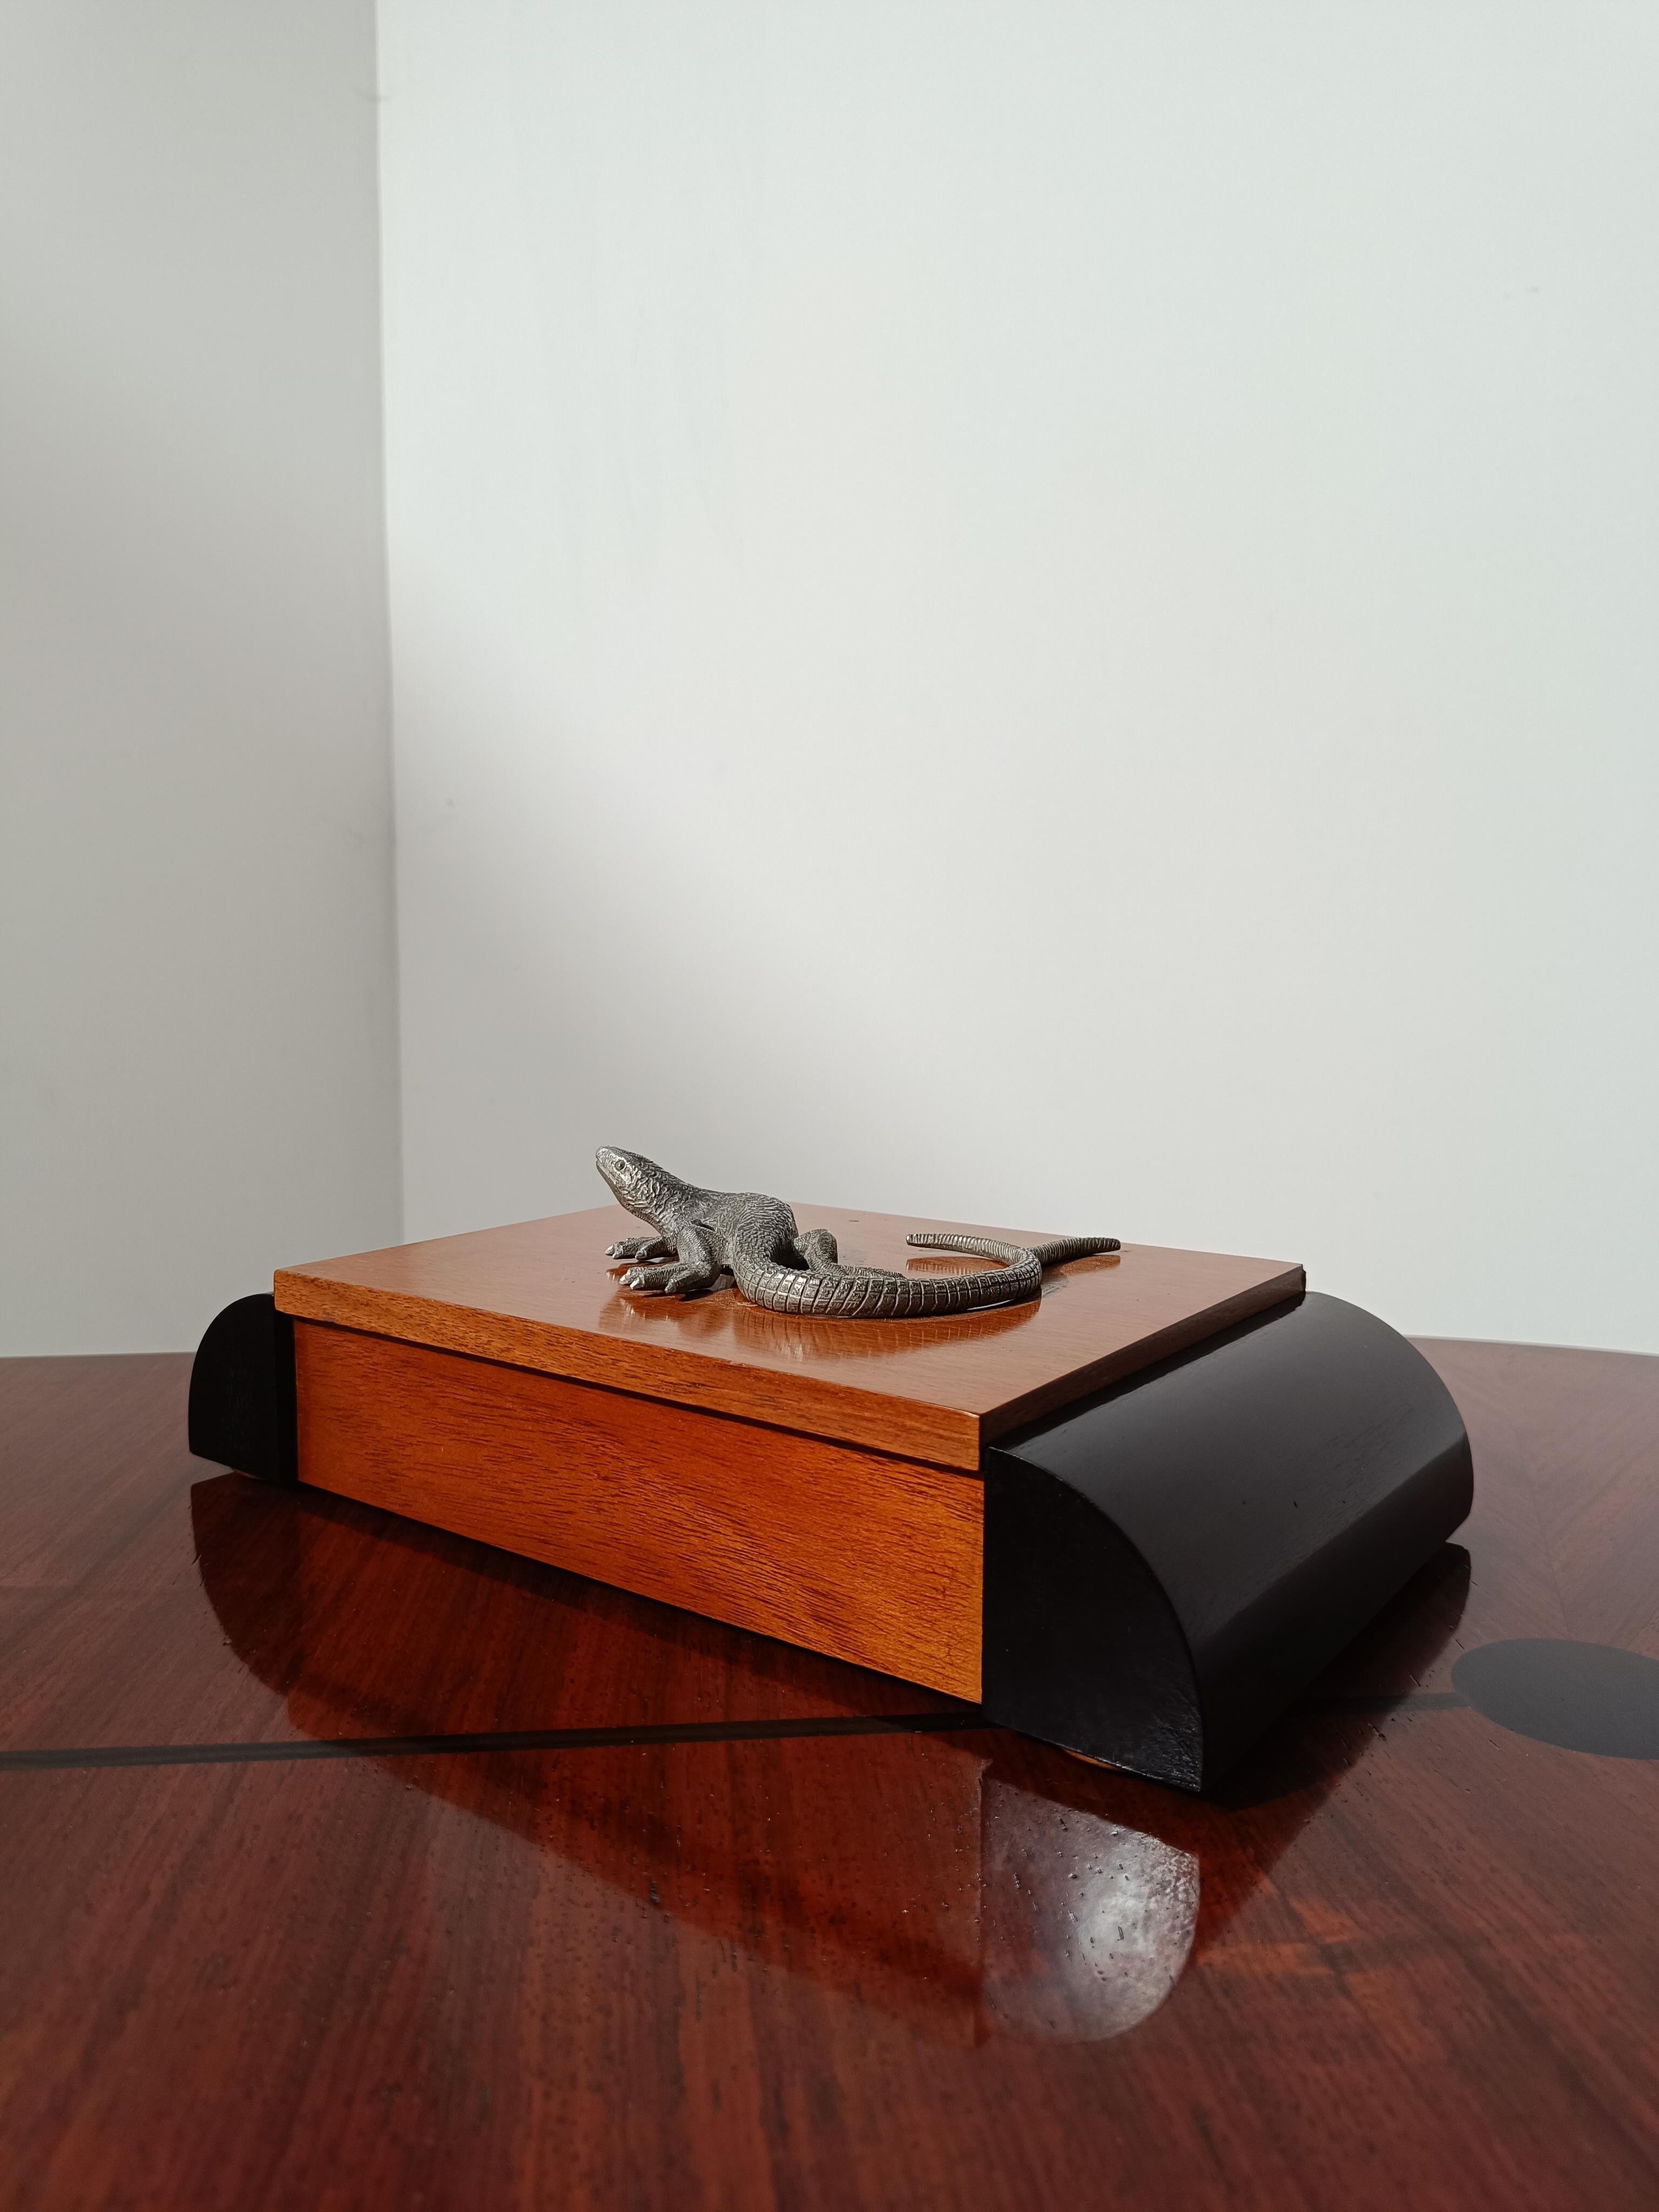 European Art Deco wooden Box decorated with a Silver Tone Metal Lizard-shaped Handle For Sale